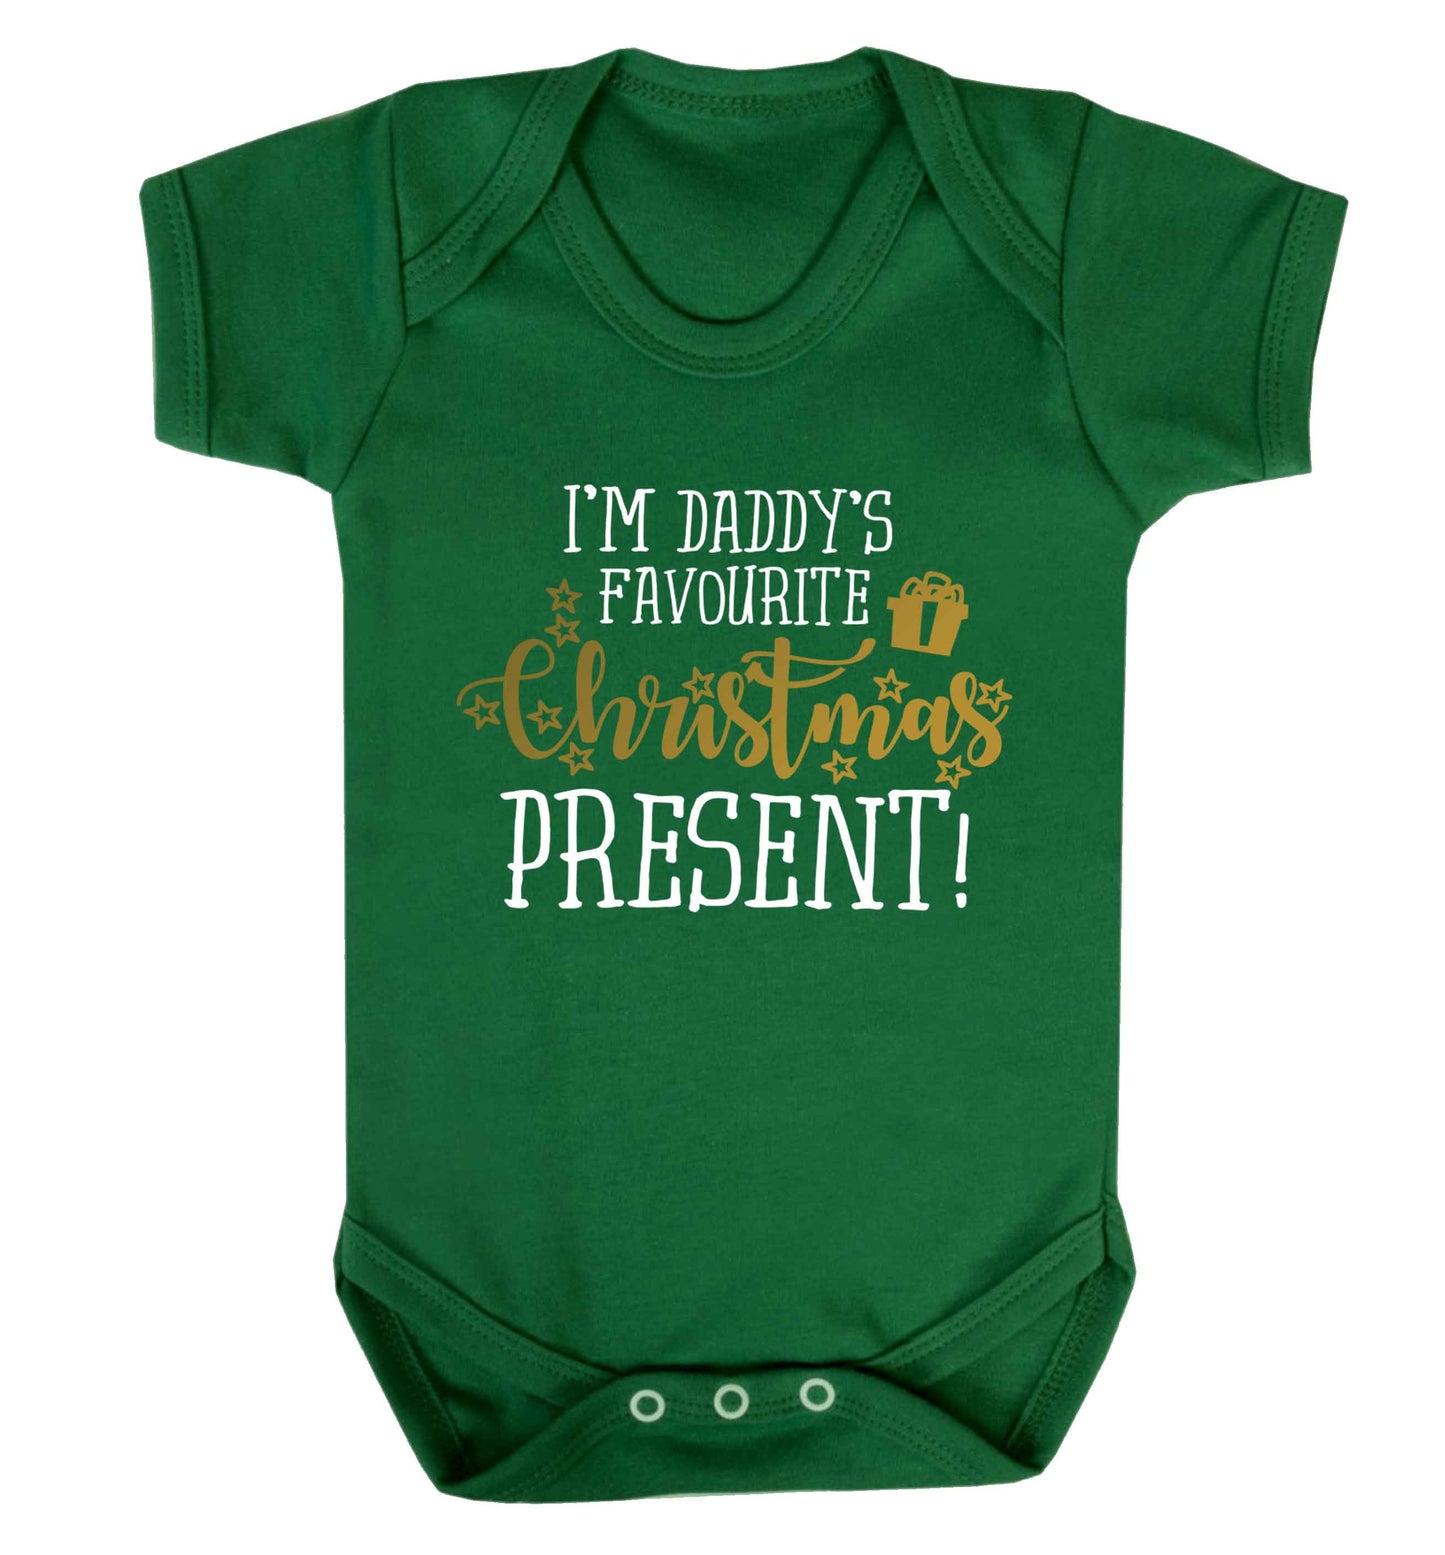 Daddy's favourite Christmas present Baby Vest green 18-24 months